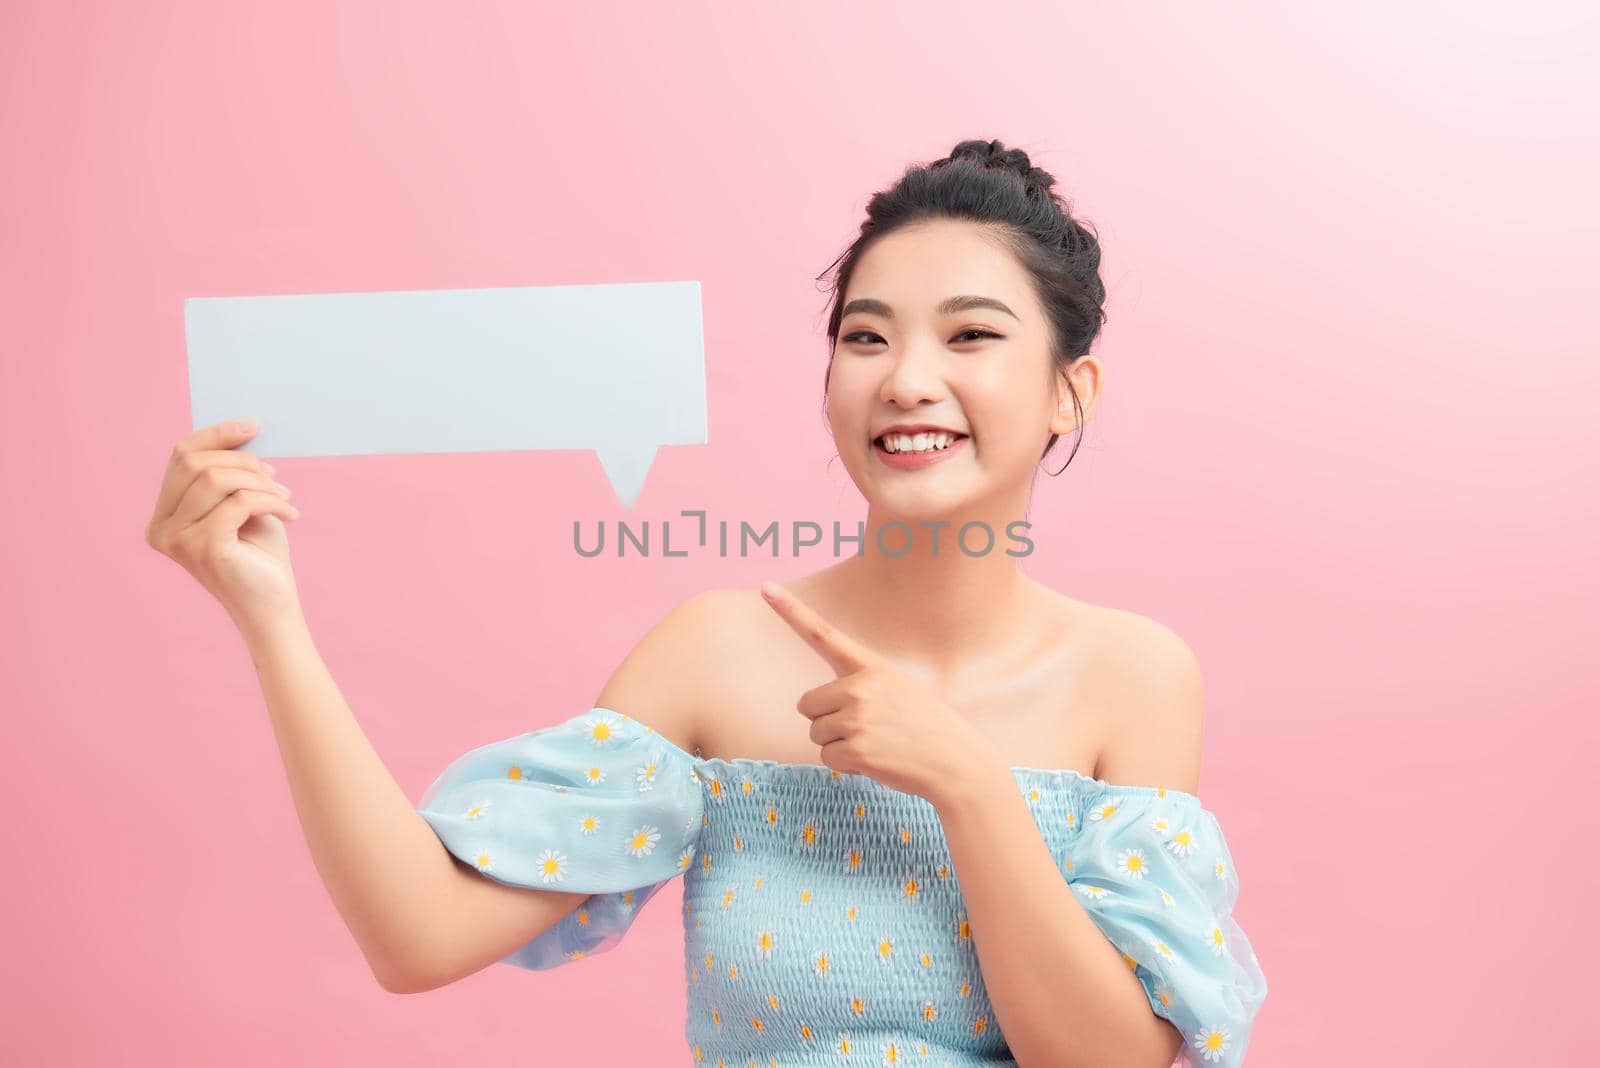 Happy Asian Girl Having Idea Holding Blank Speech Bubble Smiling on pink background